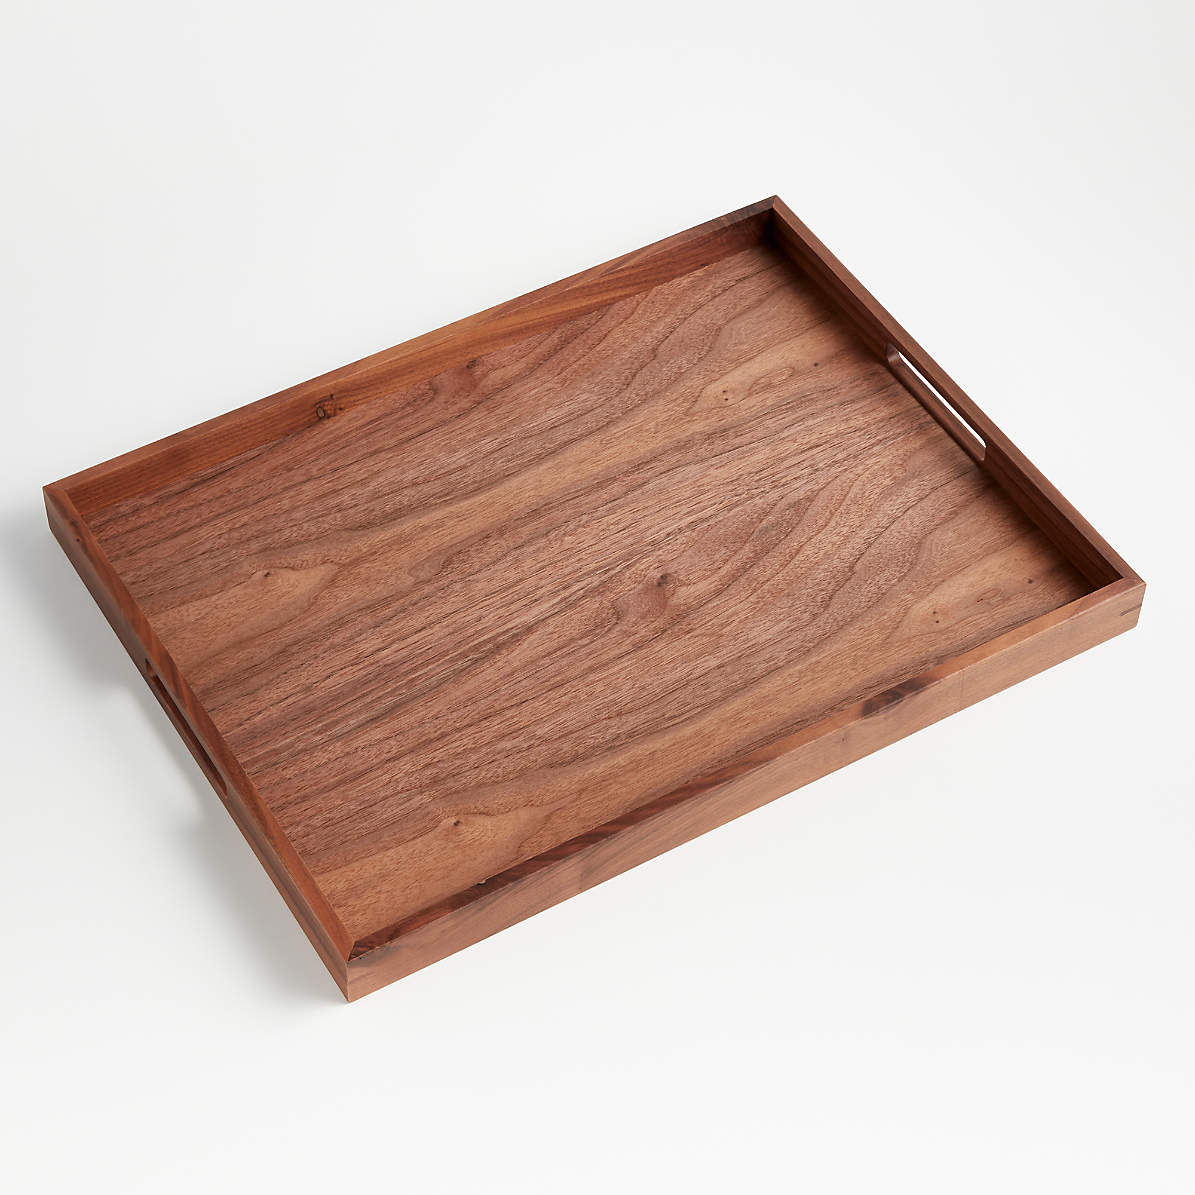 Large Wood Serving Tray With Handles, Ottoman Tray -  Canada